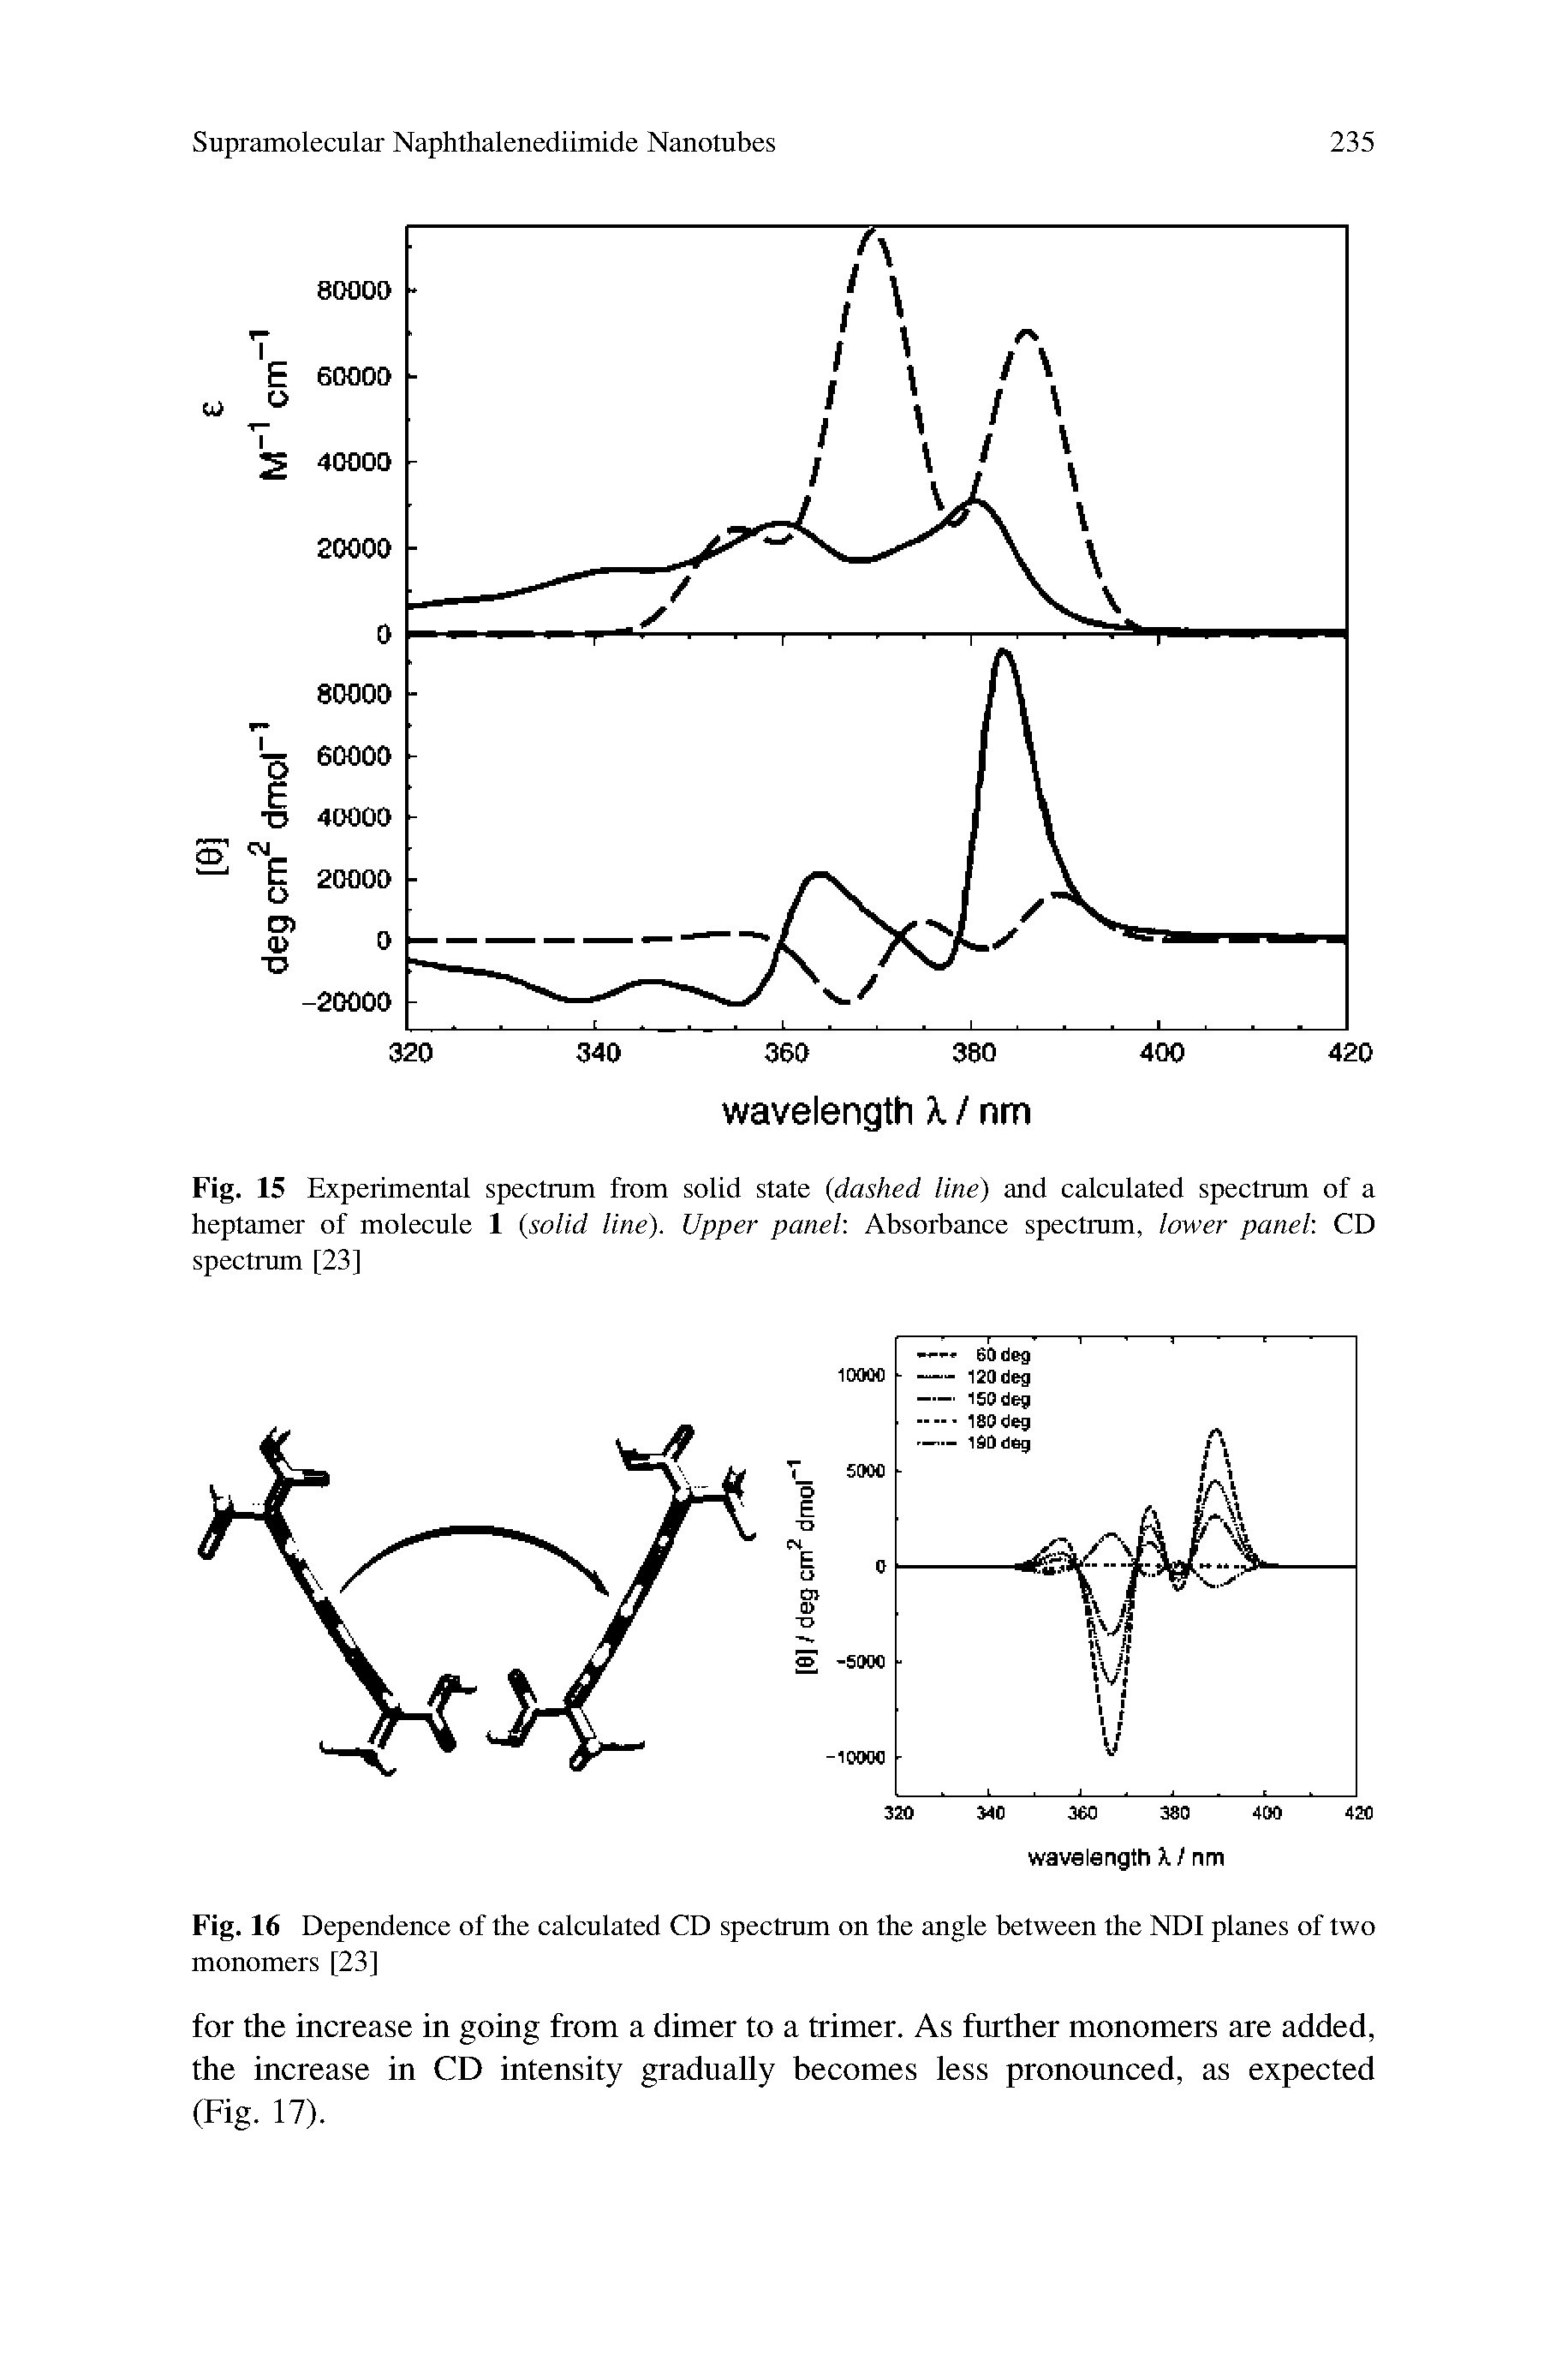 Fig. 15 Experimental spectrum from solid state (dashed line) and calculated spectrum of a heptamer of molecule 1 (solid line). Upper panel. Absorbance spectrum, lower panel. CD spectrum [23]...